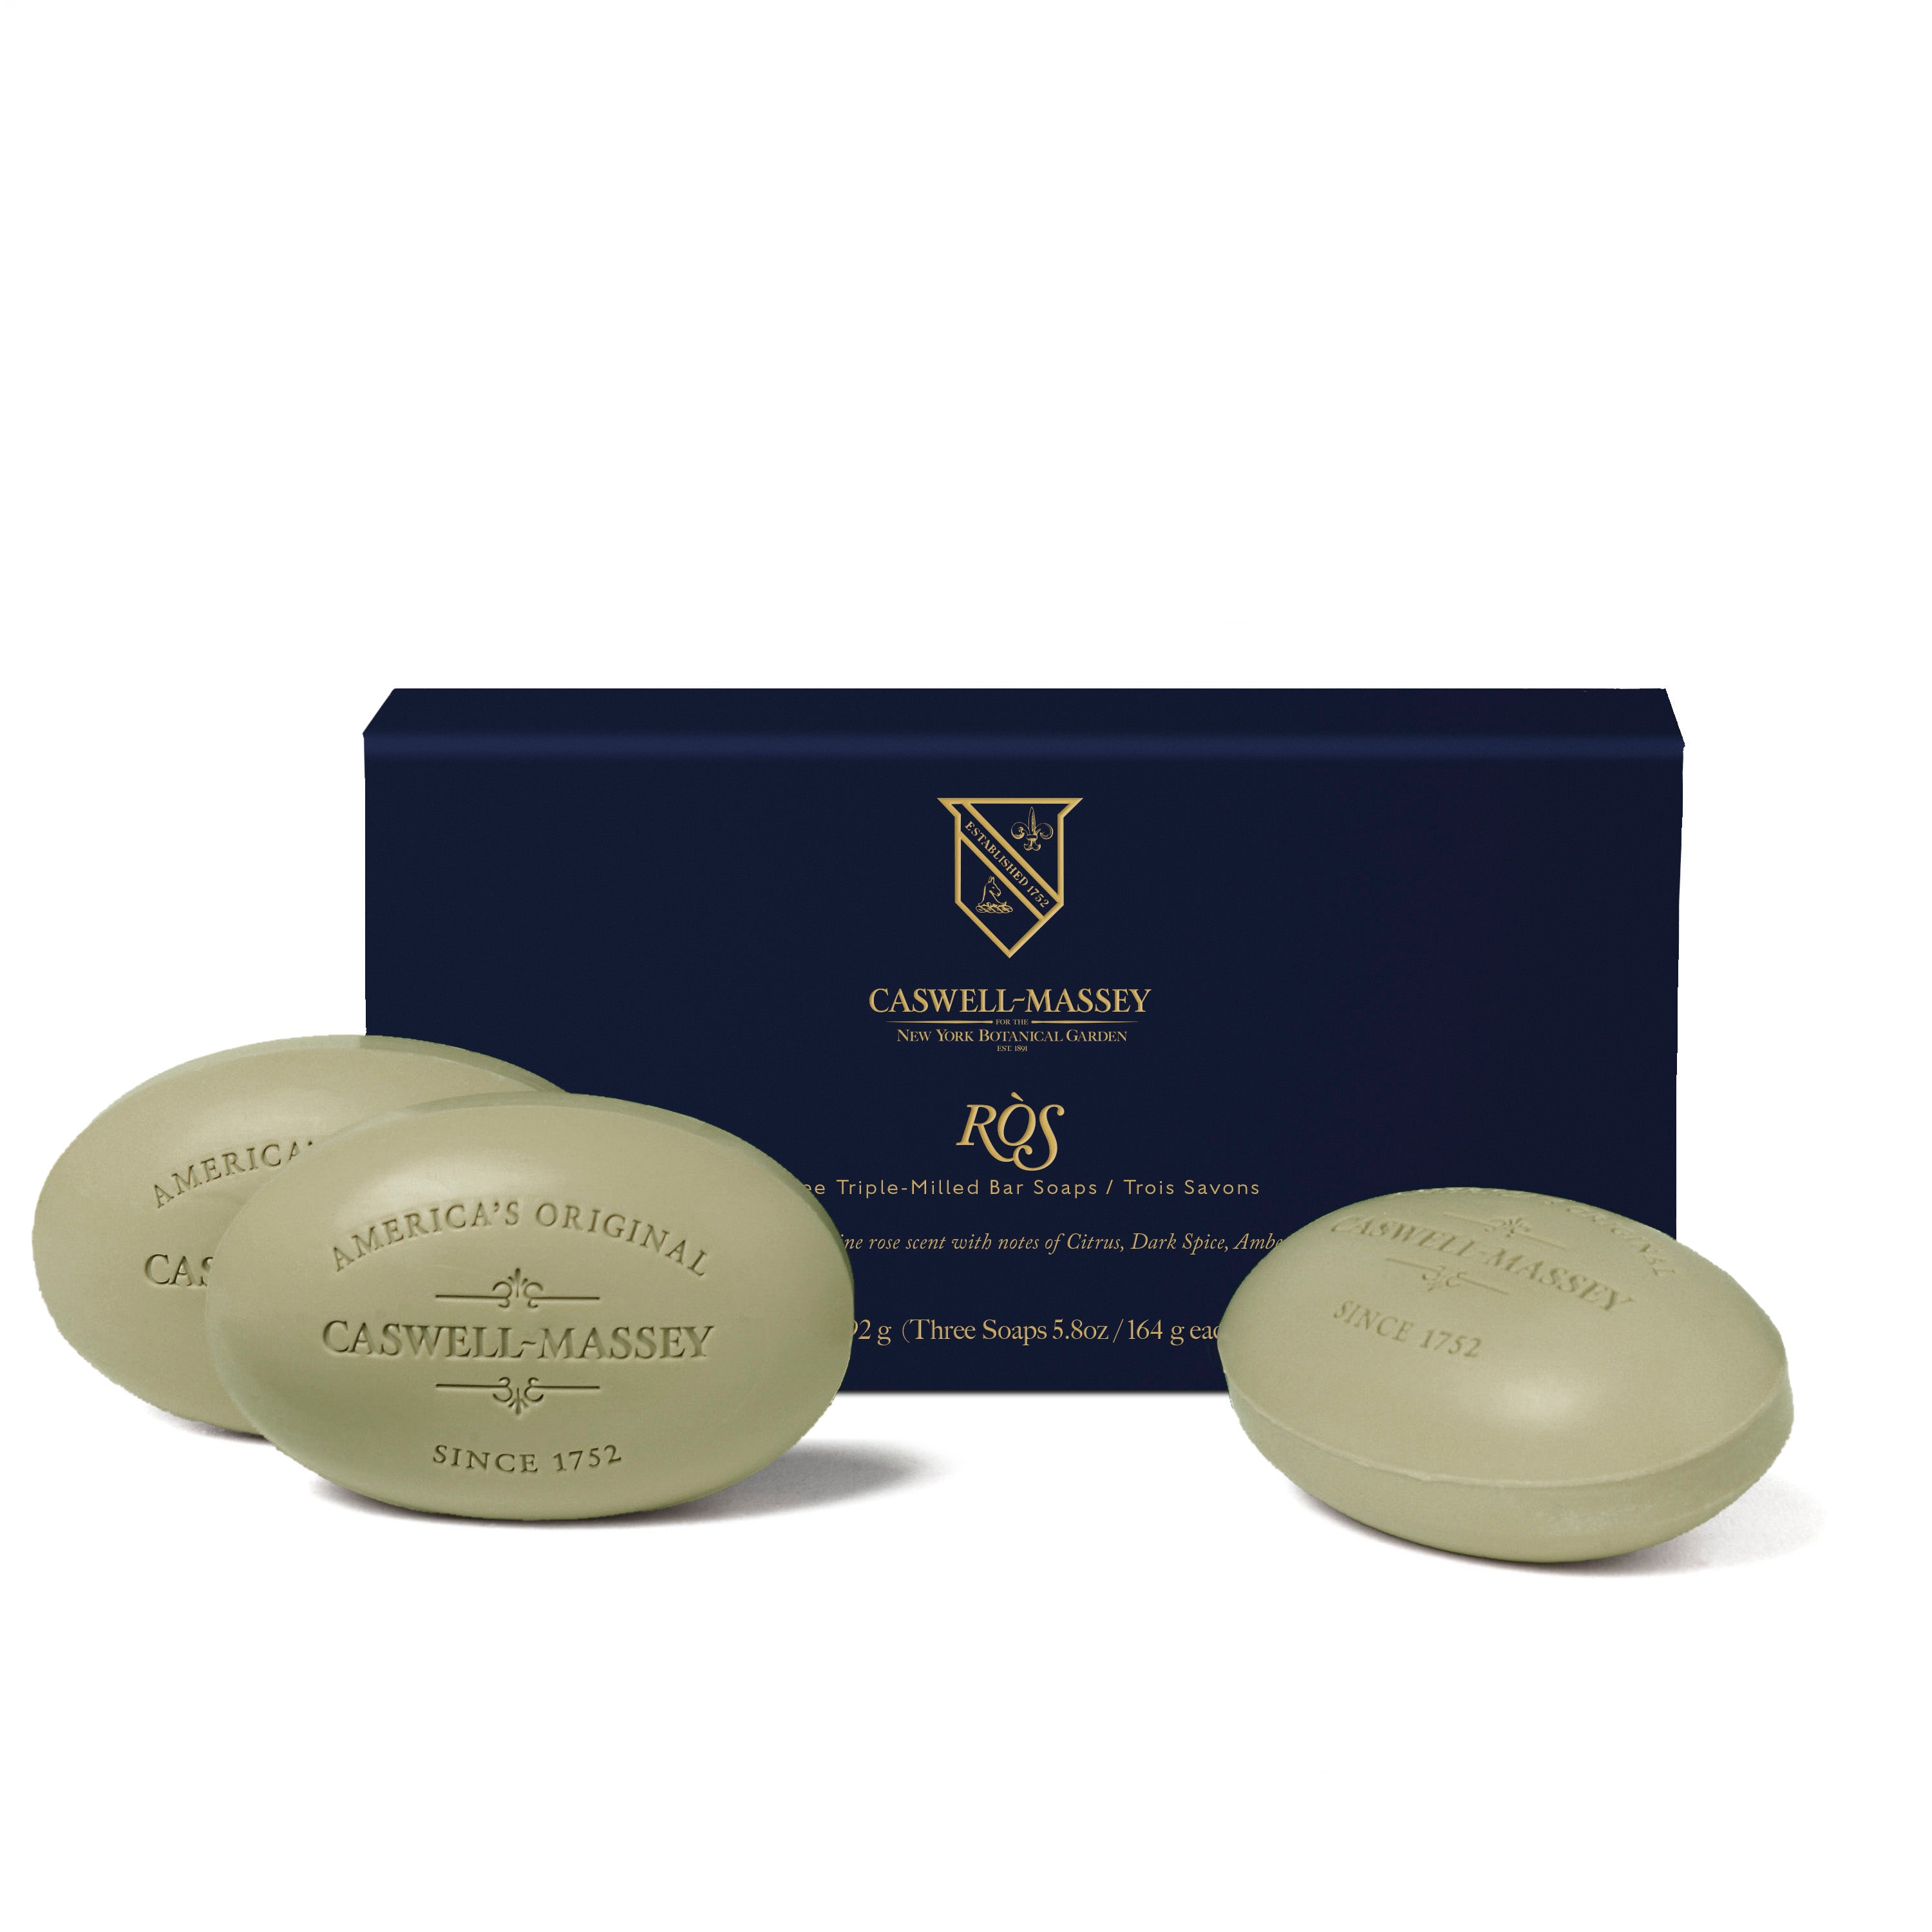 Caswell-Massey RÒS 3-Soap Set shown with navy blue gift box alongside sage green bath soaps